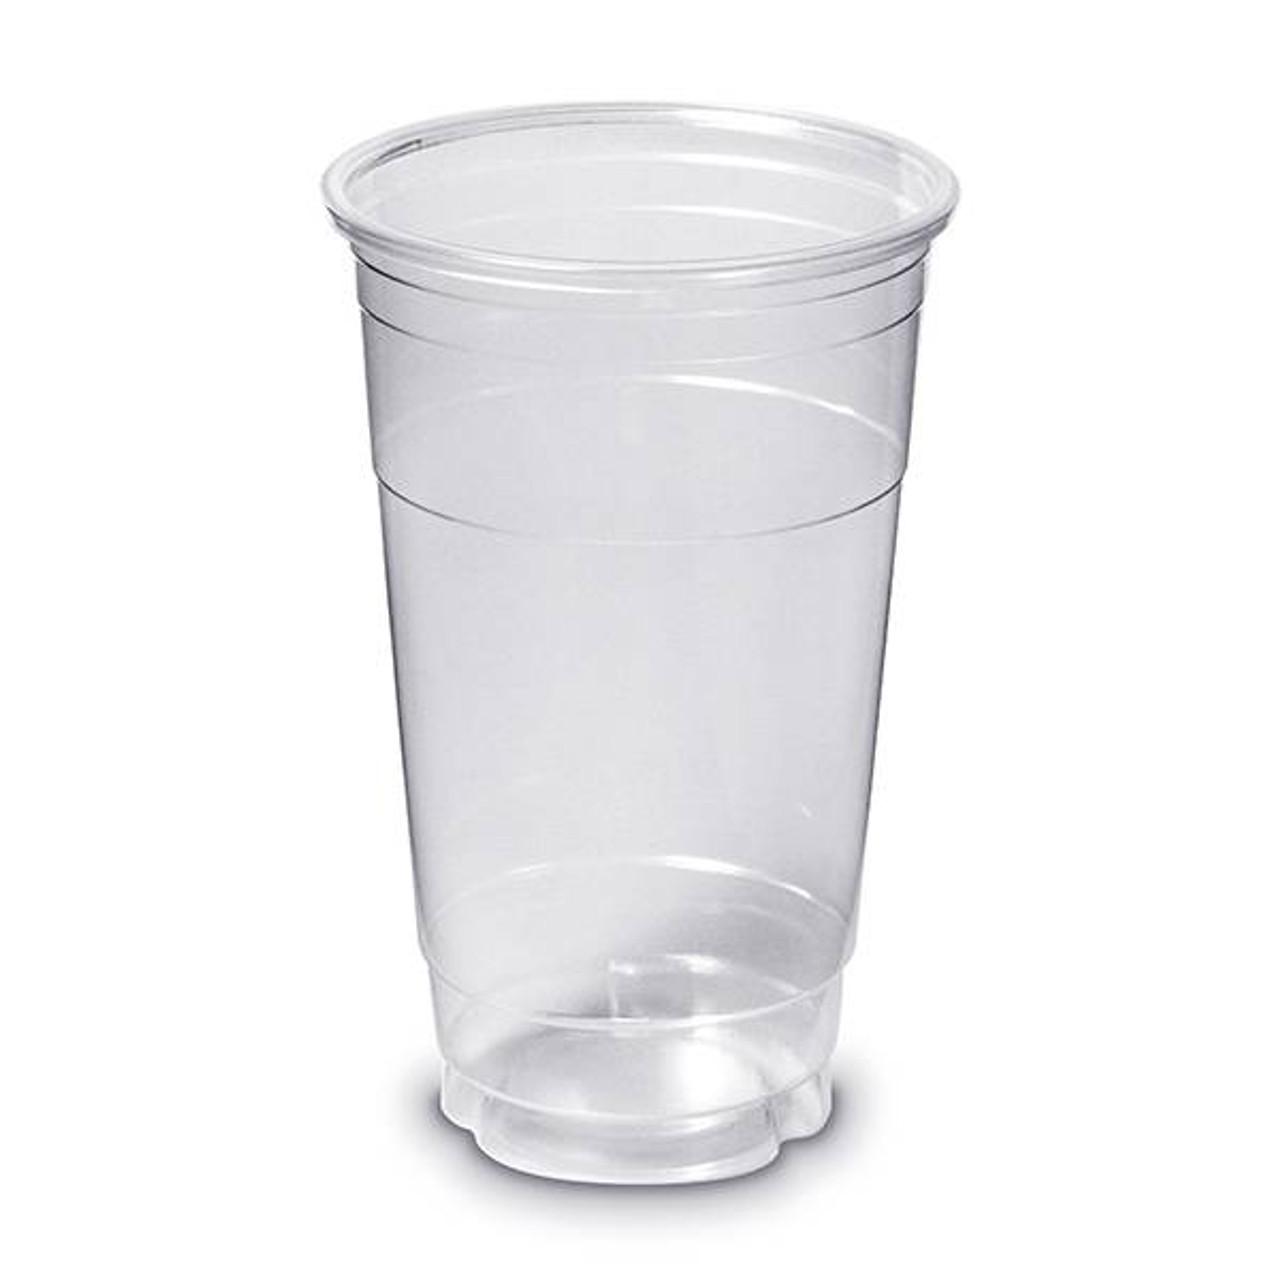 100 Pack] 20 oz Clear Plastic Cups with Flat Lids and Clear Straws